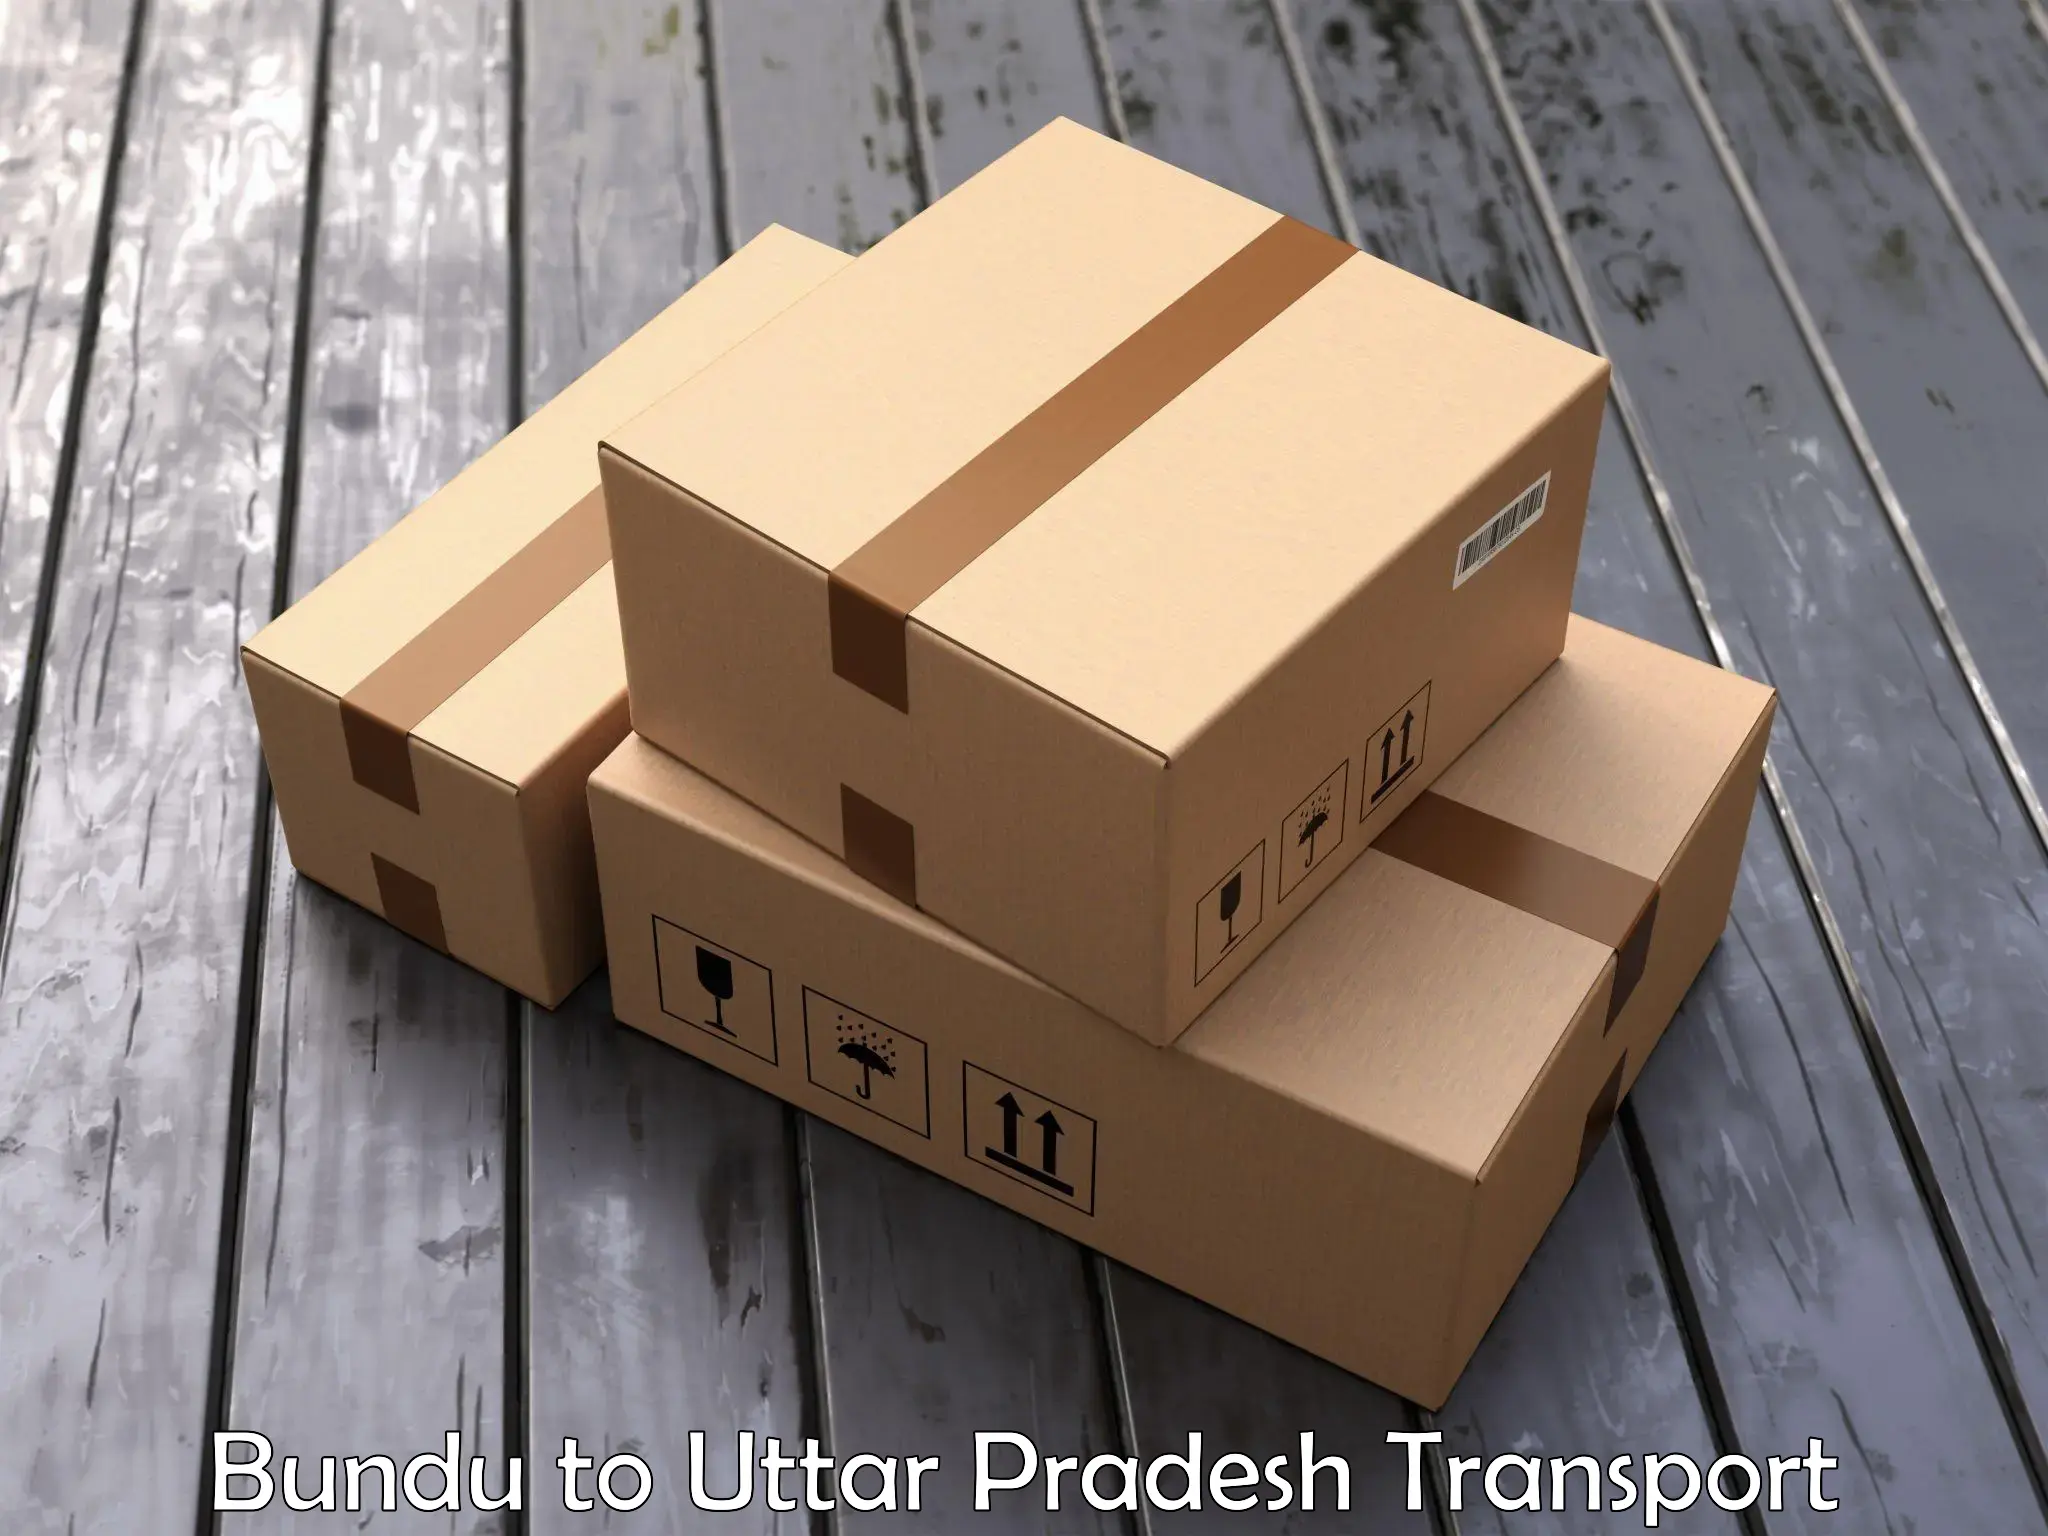 Air freight transport services Bundu to Fatehabad Agra